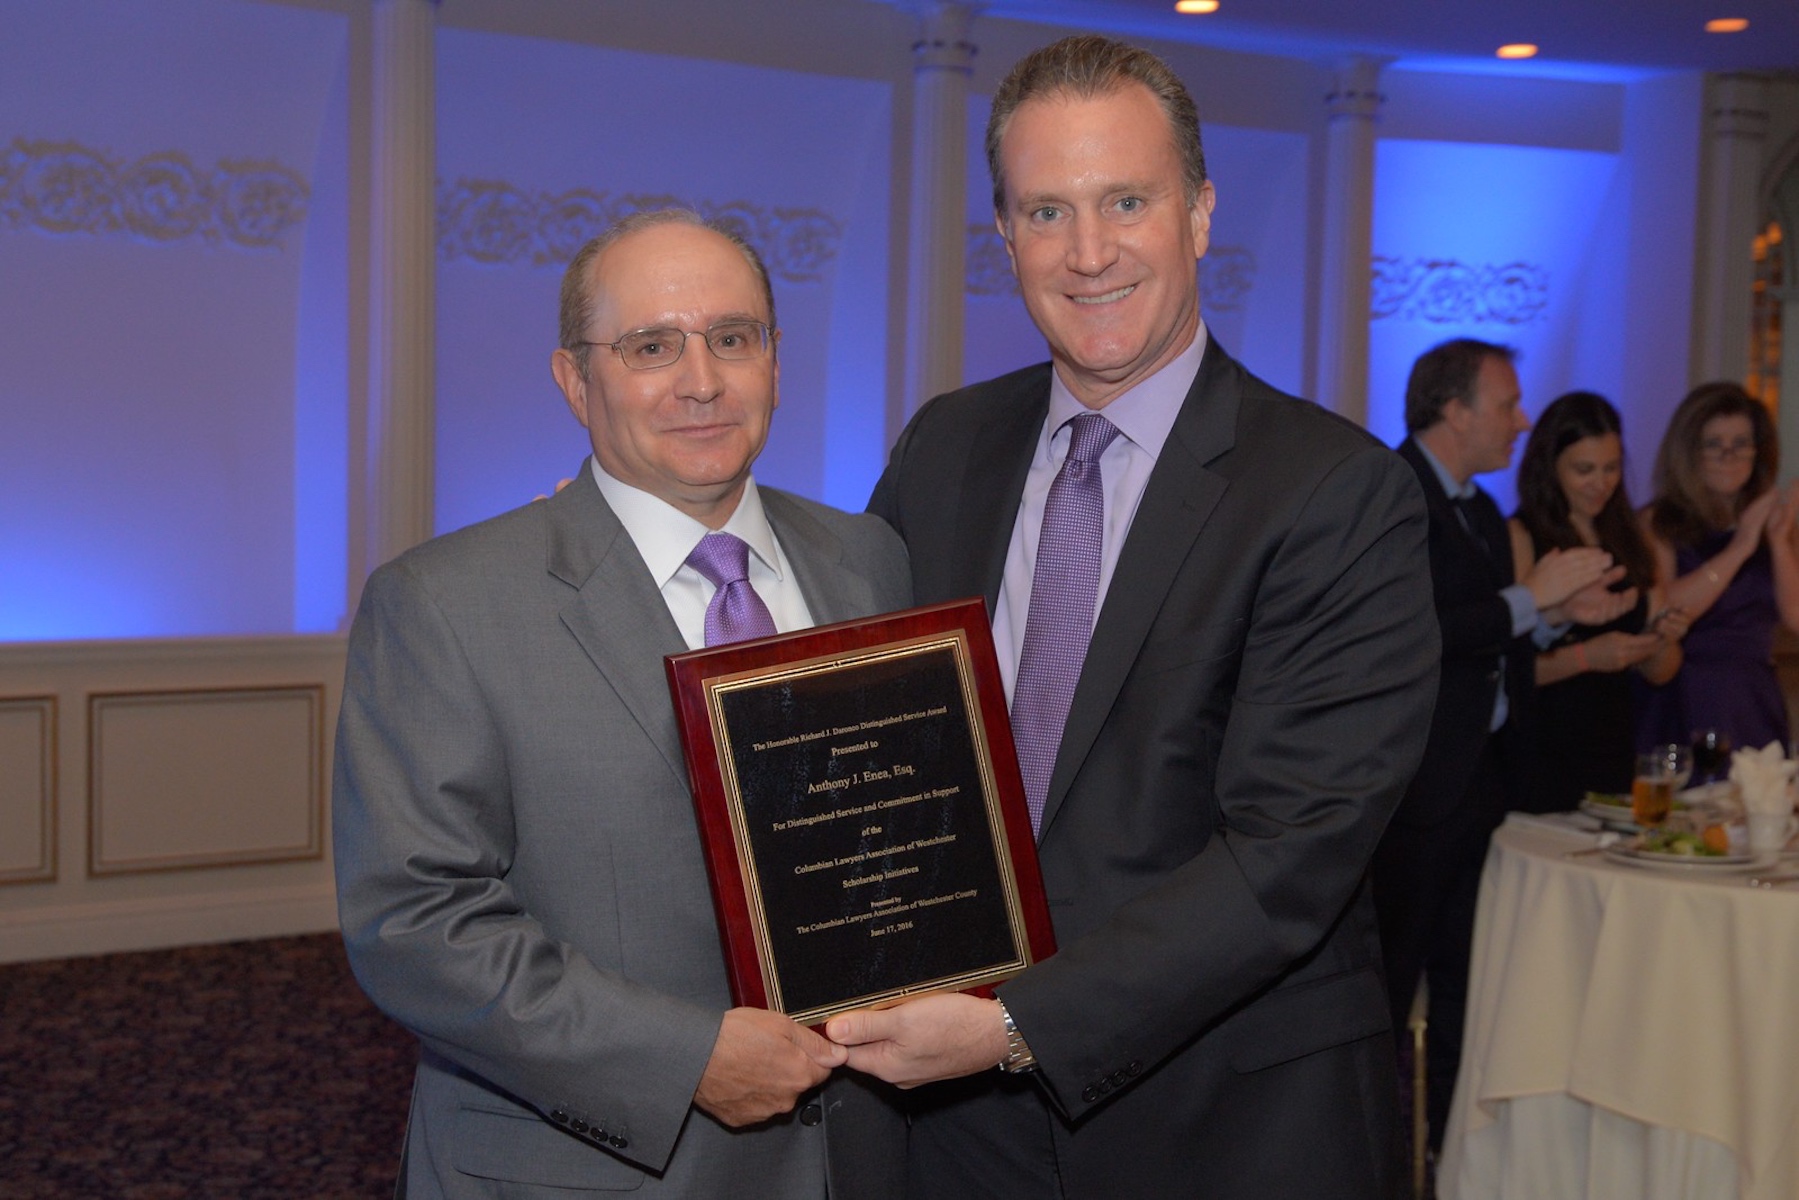 Elder law attorney Anthony Enea, recipient of the Honorable Richard J. Daronco Distinguished Service Award, and John Pappalardo, president of the Columbian Lawyers Association of Westchester County